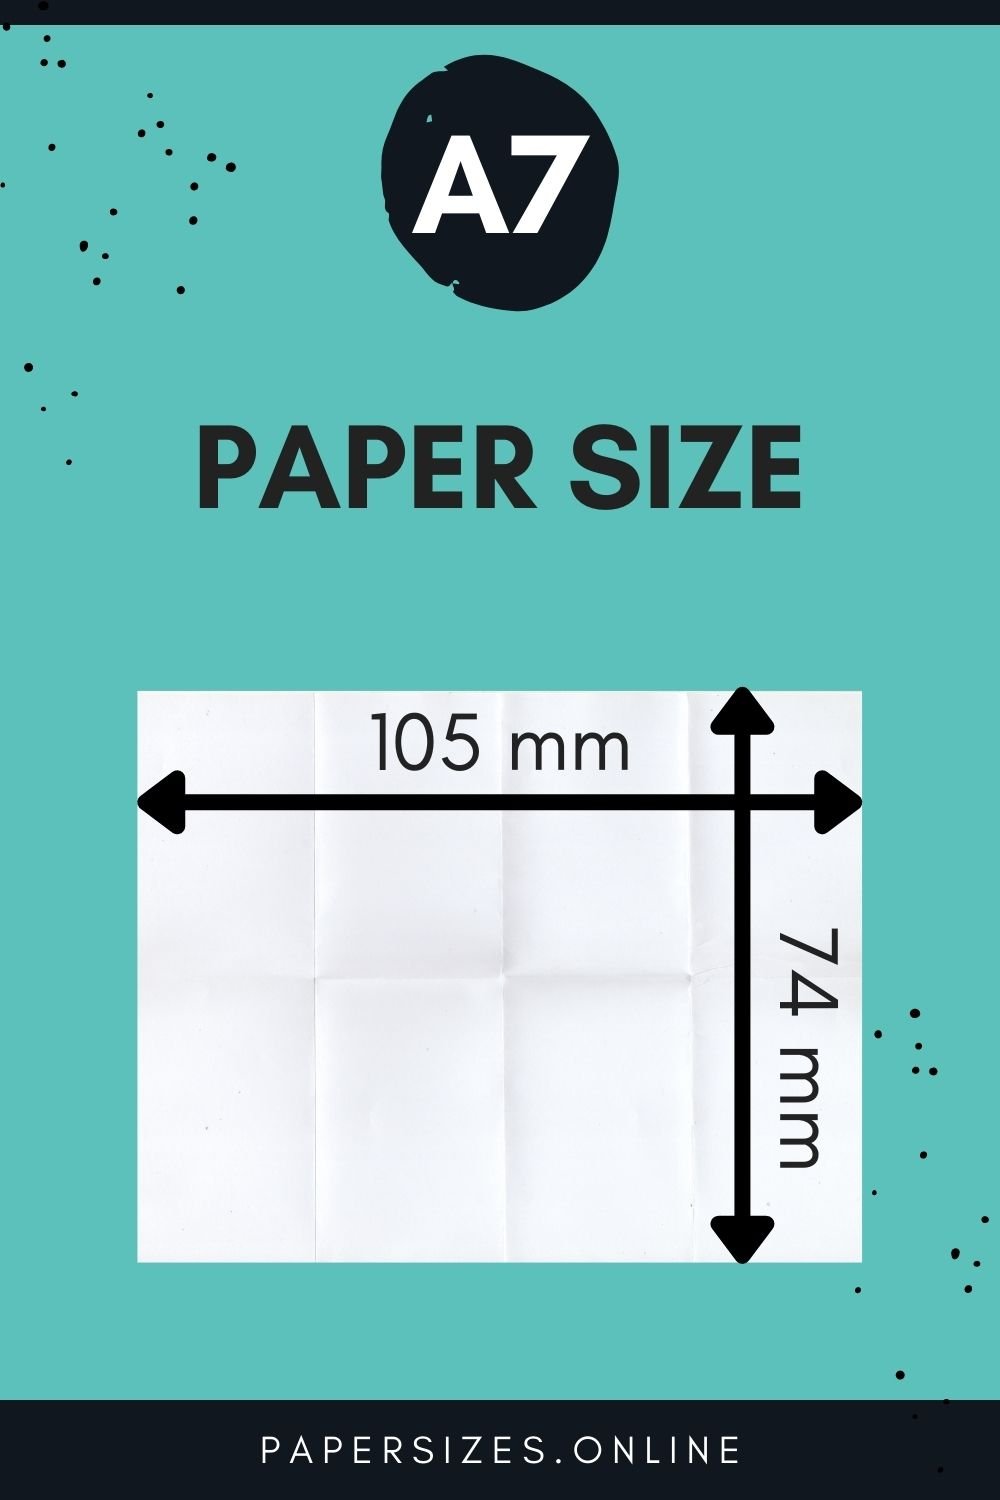 A7 paper size in mm